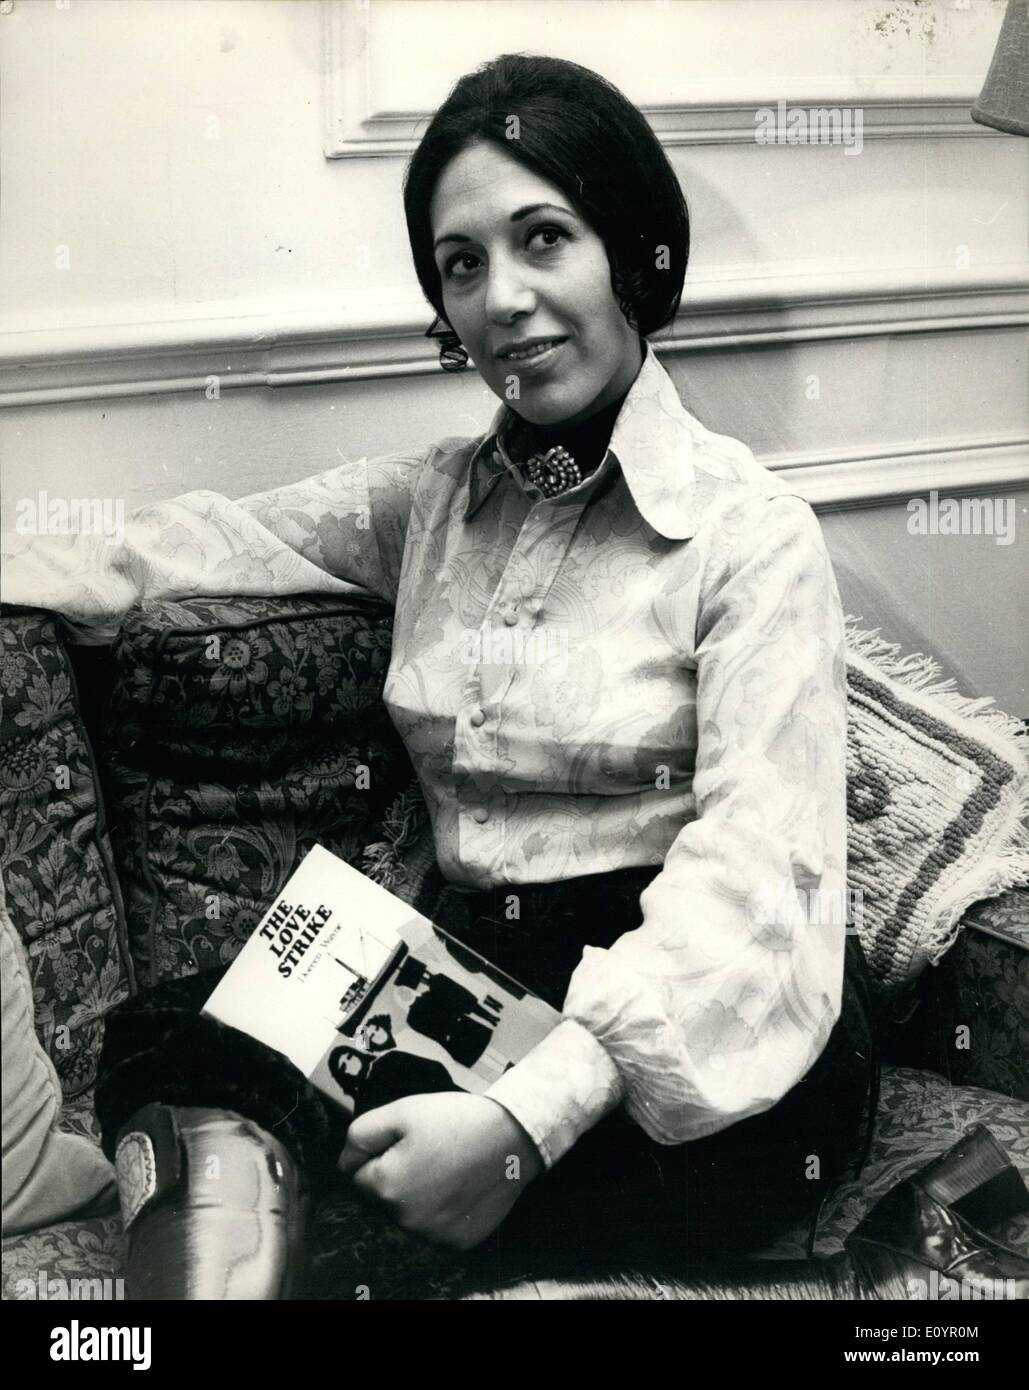 Mar. 03, 1971 - ''The Love Strike'' Authoress in Lonodn: Doreen Wayne, Manchester born wife of American actor/producer Jerry Wayne, has arrived in London from scriptwriting in Hollywood for the publication of her new book ''The Love Strike'', published by W.H. Allen on Monday, 15th March. Photo Shows Doreen Wayne pictured with a copy of her new book, in London today. Stock Photo